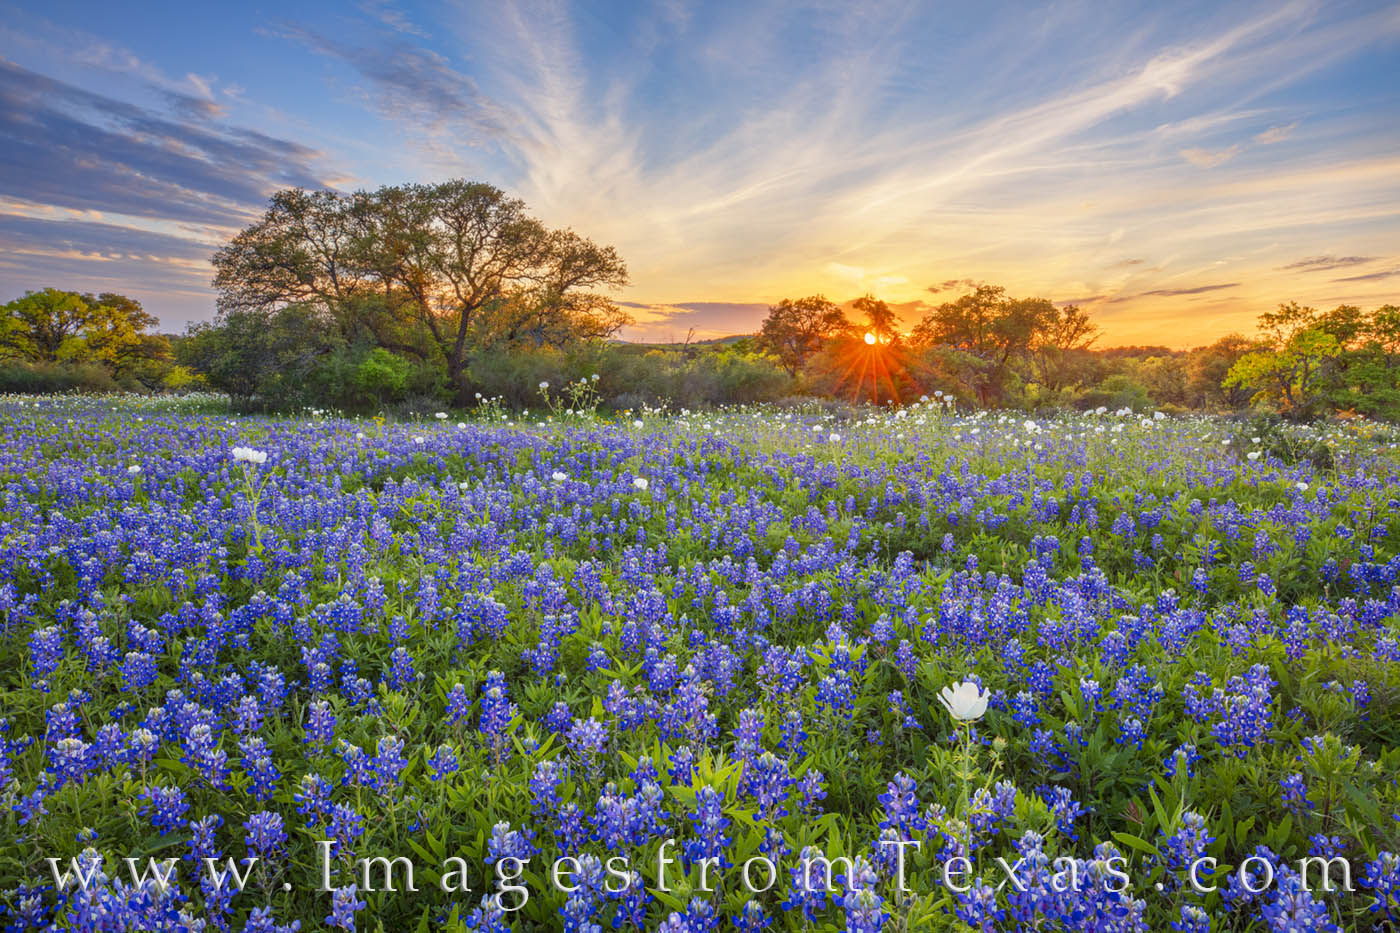 Tucked away in Mason County on a small dirt road, a field of bluebonnets sprinkled with white prickly poppies colors the landscape...